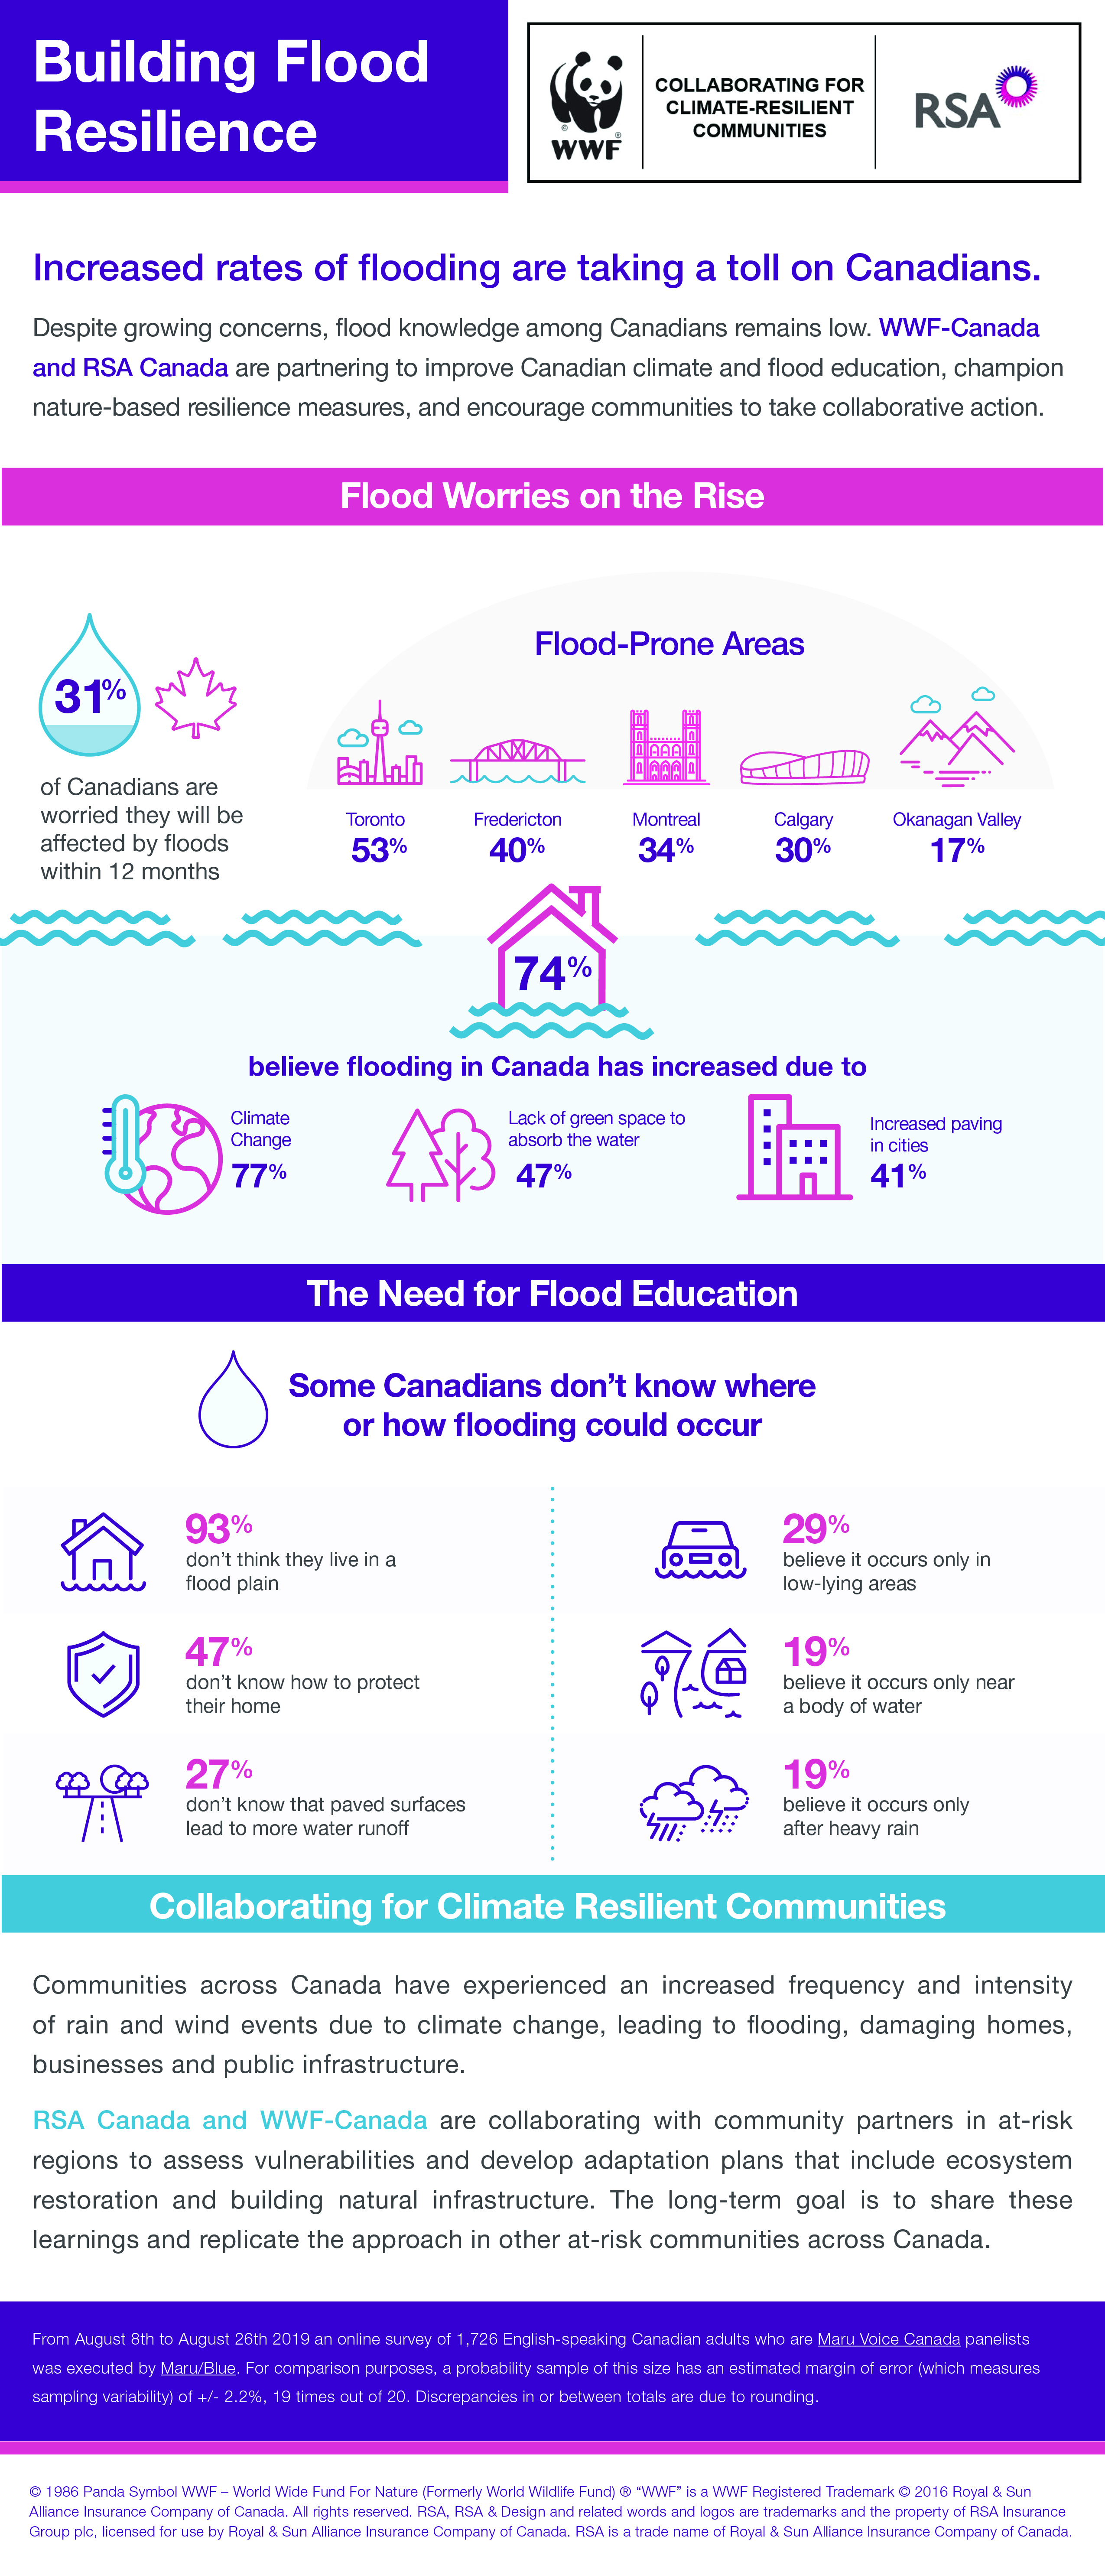 WWF-Canada Building Flood Resilience infographic